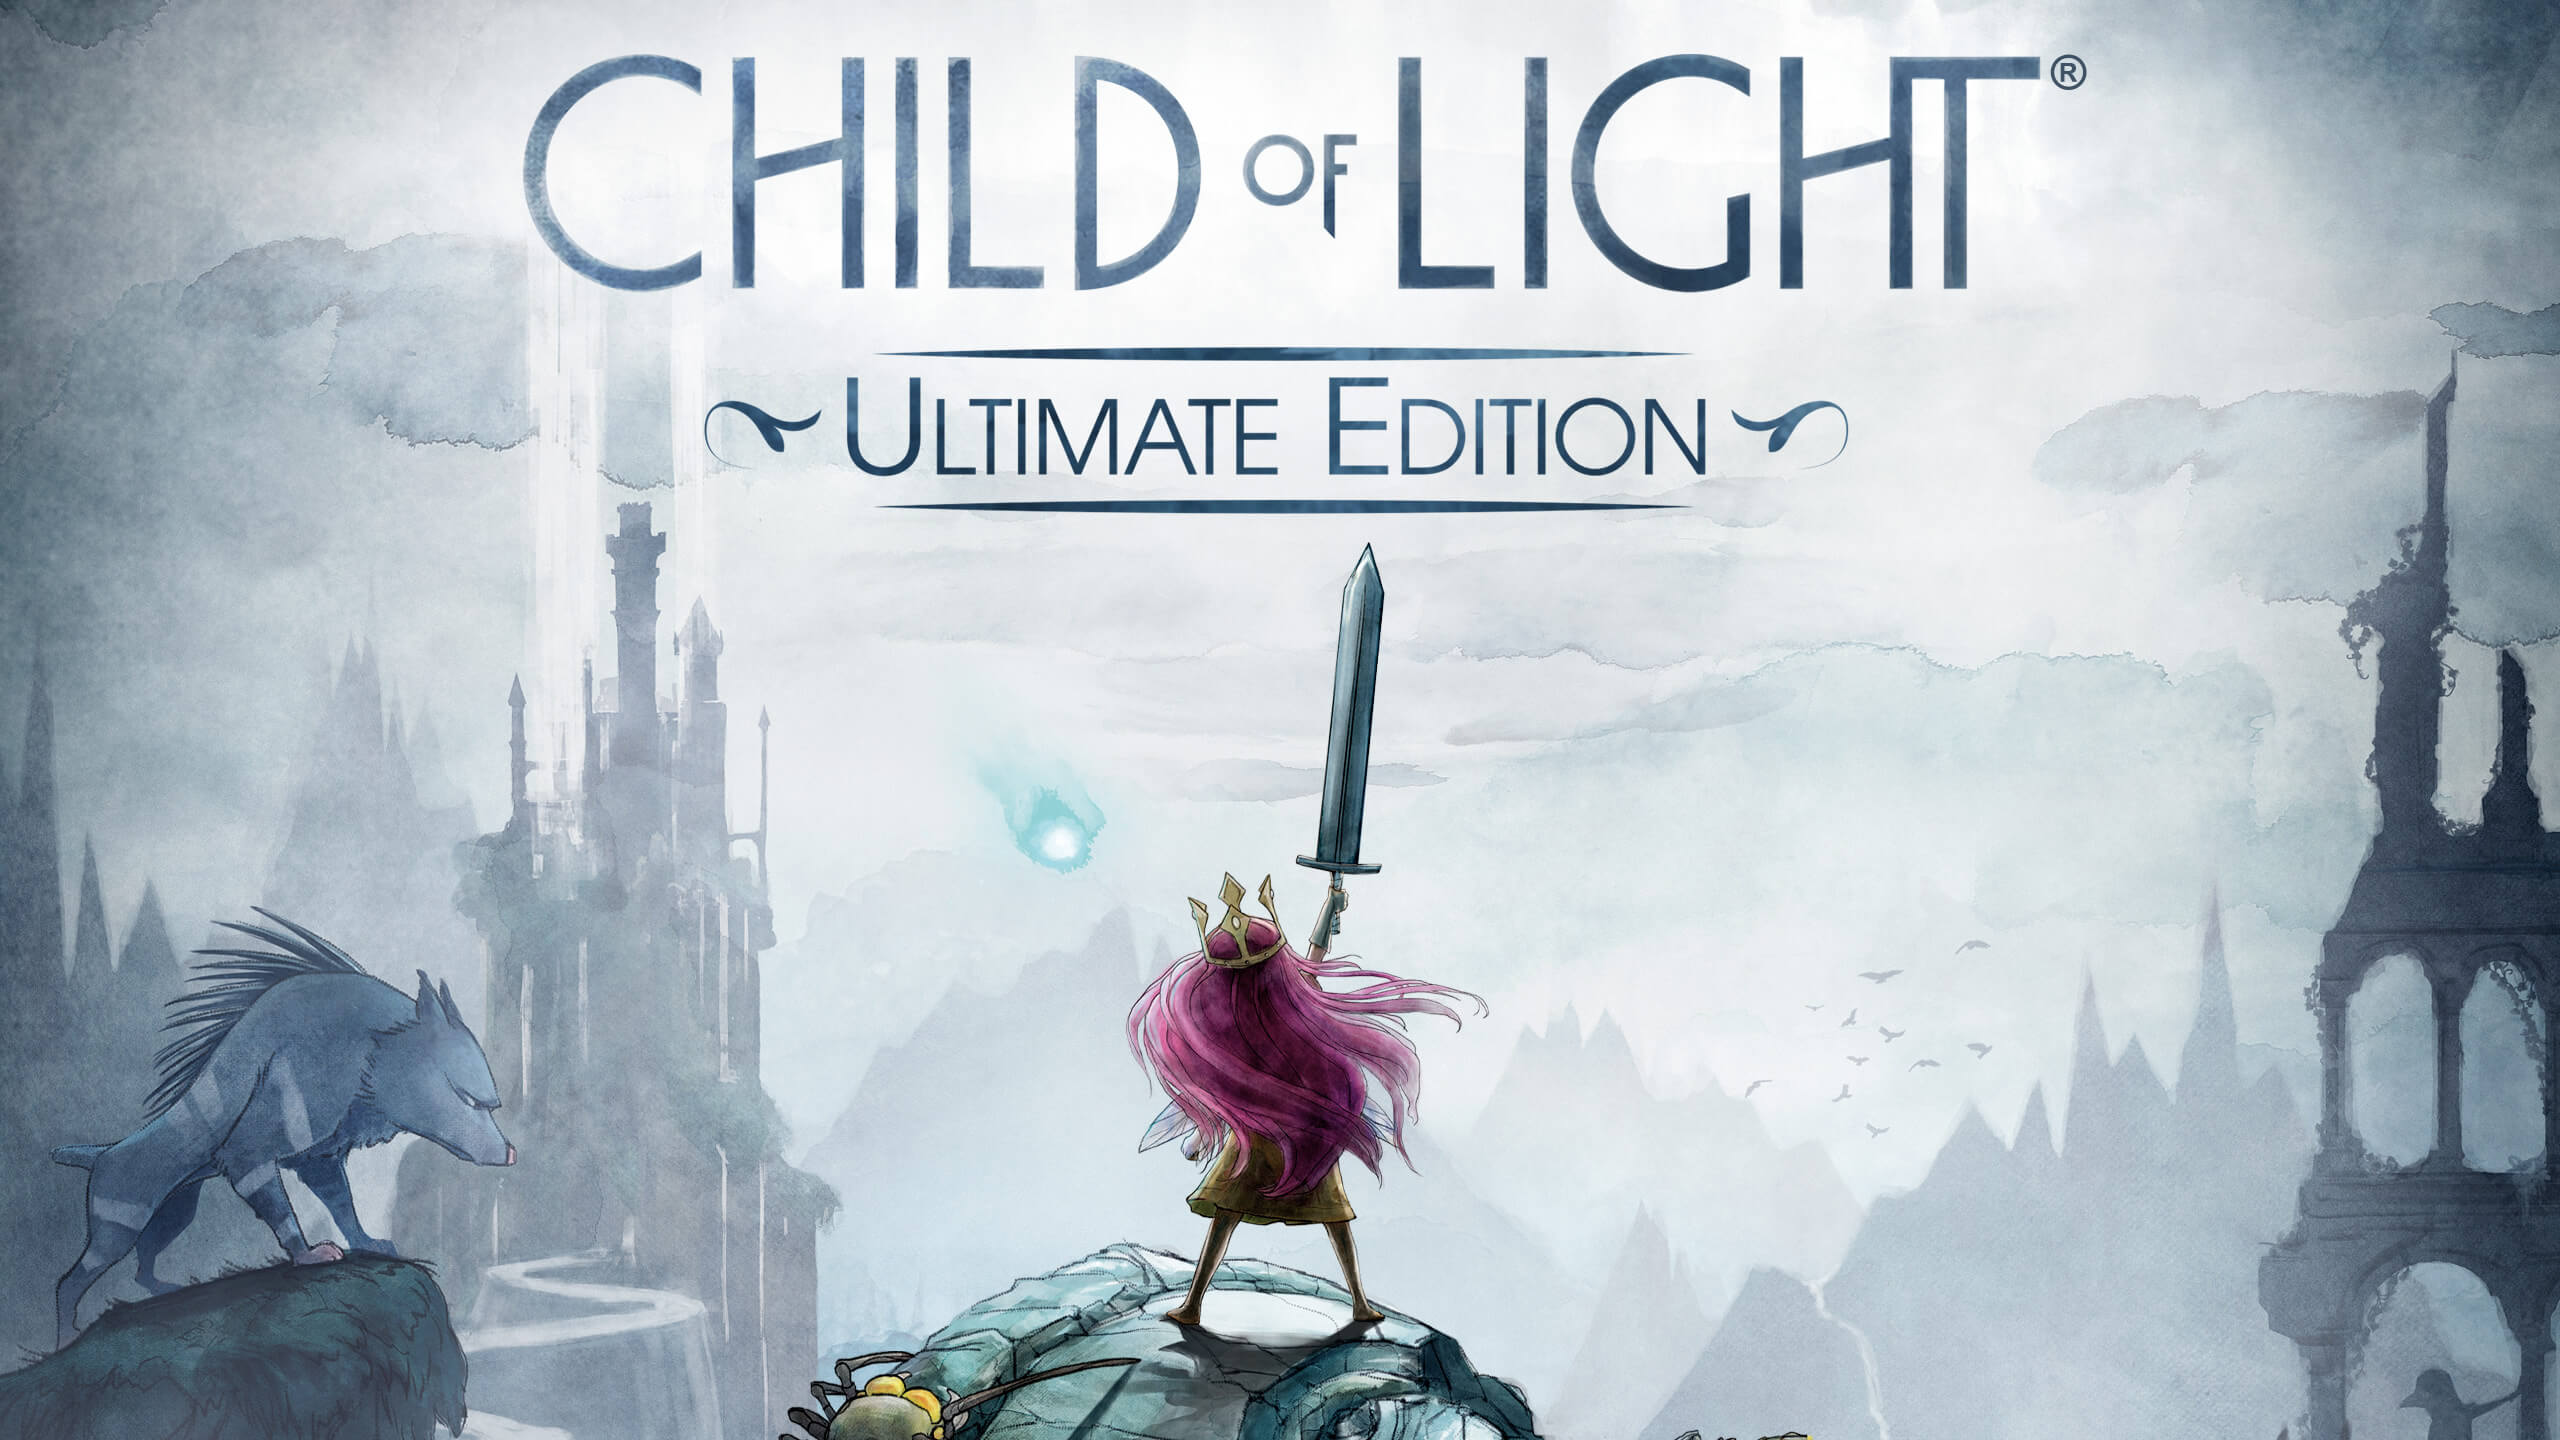 Child of Light free full pc game for download